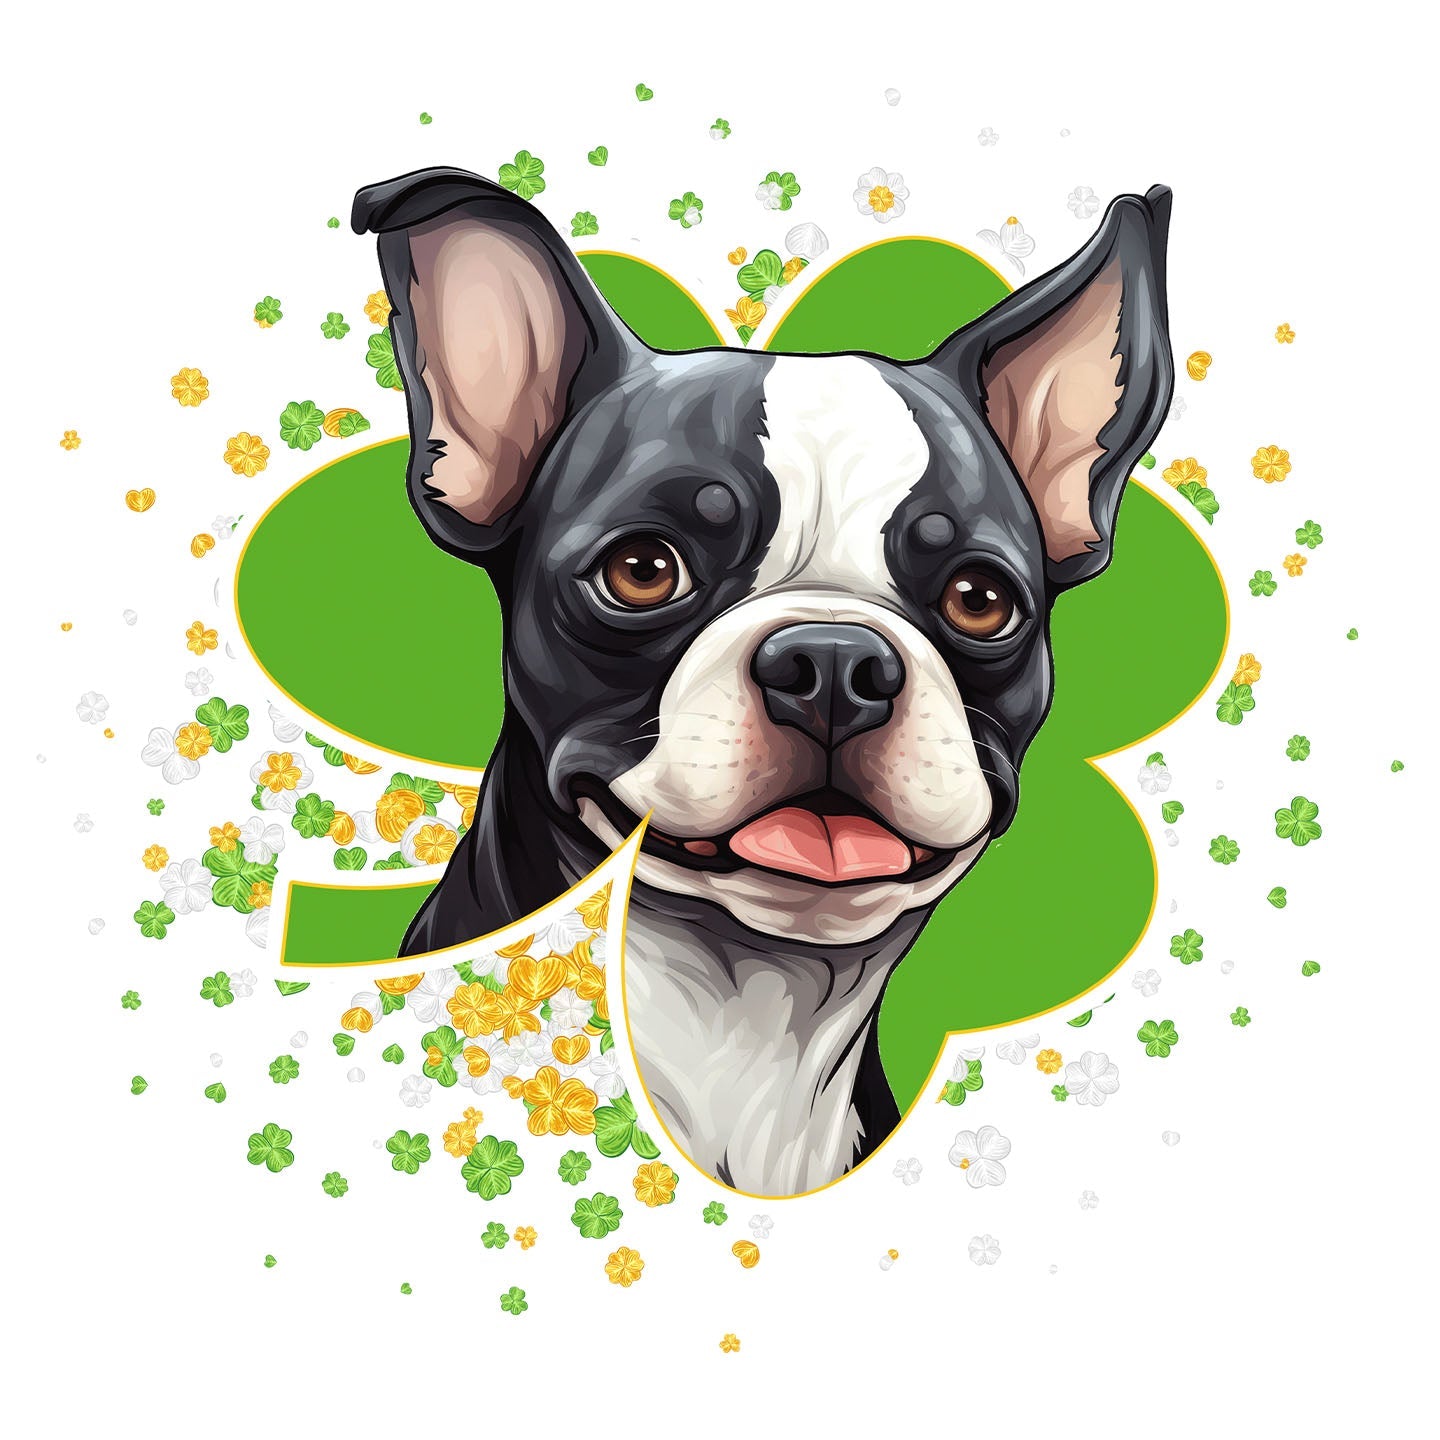 Big Clover St. Patrick's Day Boston Terrier - Women's Fitted T-Shirt